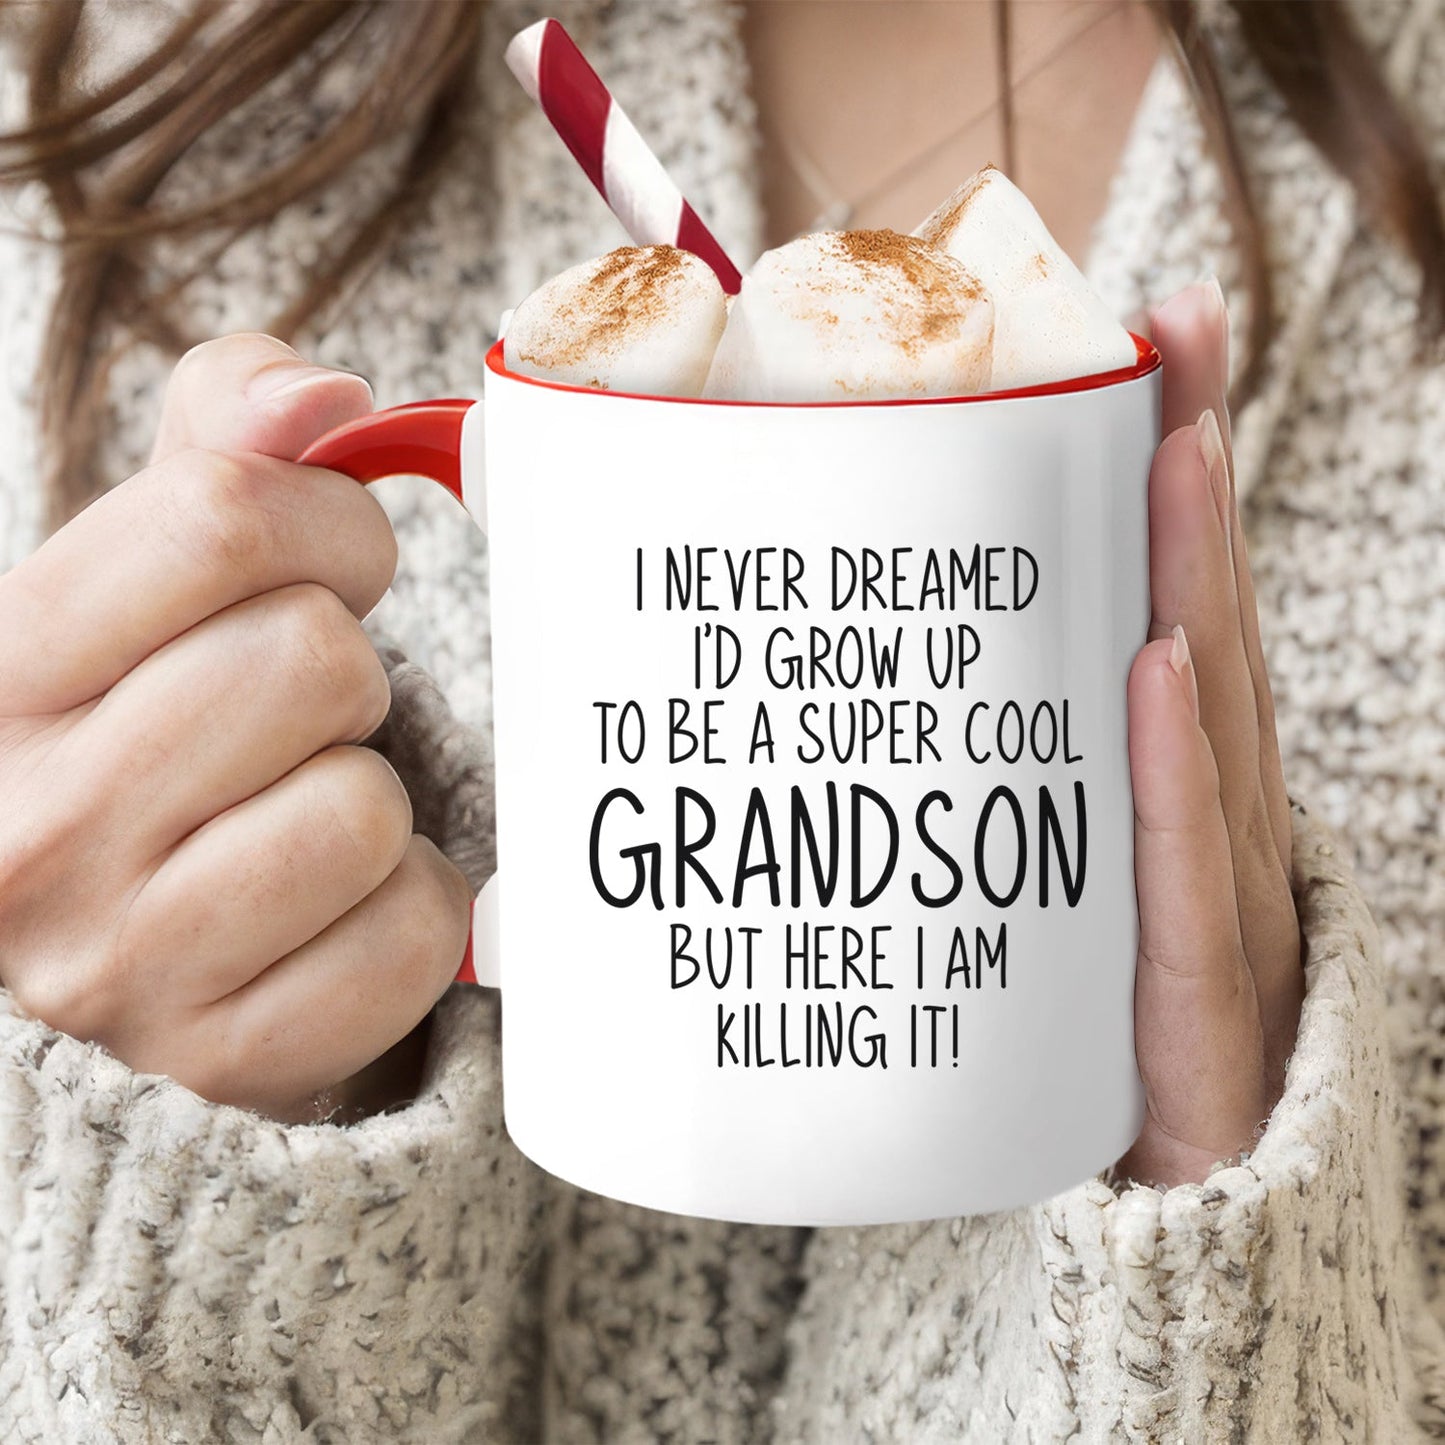 A Super Cool Grandson - Personalized Birthday or Christmas gift For Grandson - Custom Accent Mug - MyMindfulGifts